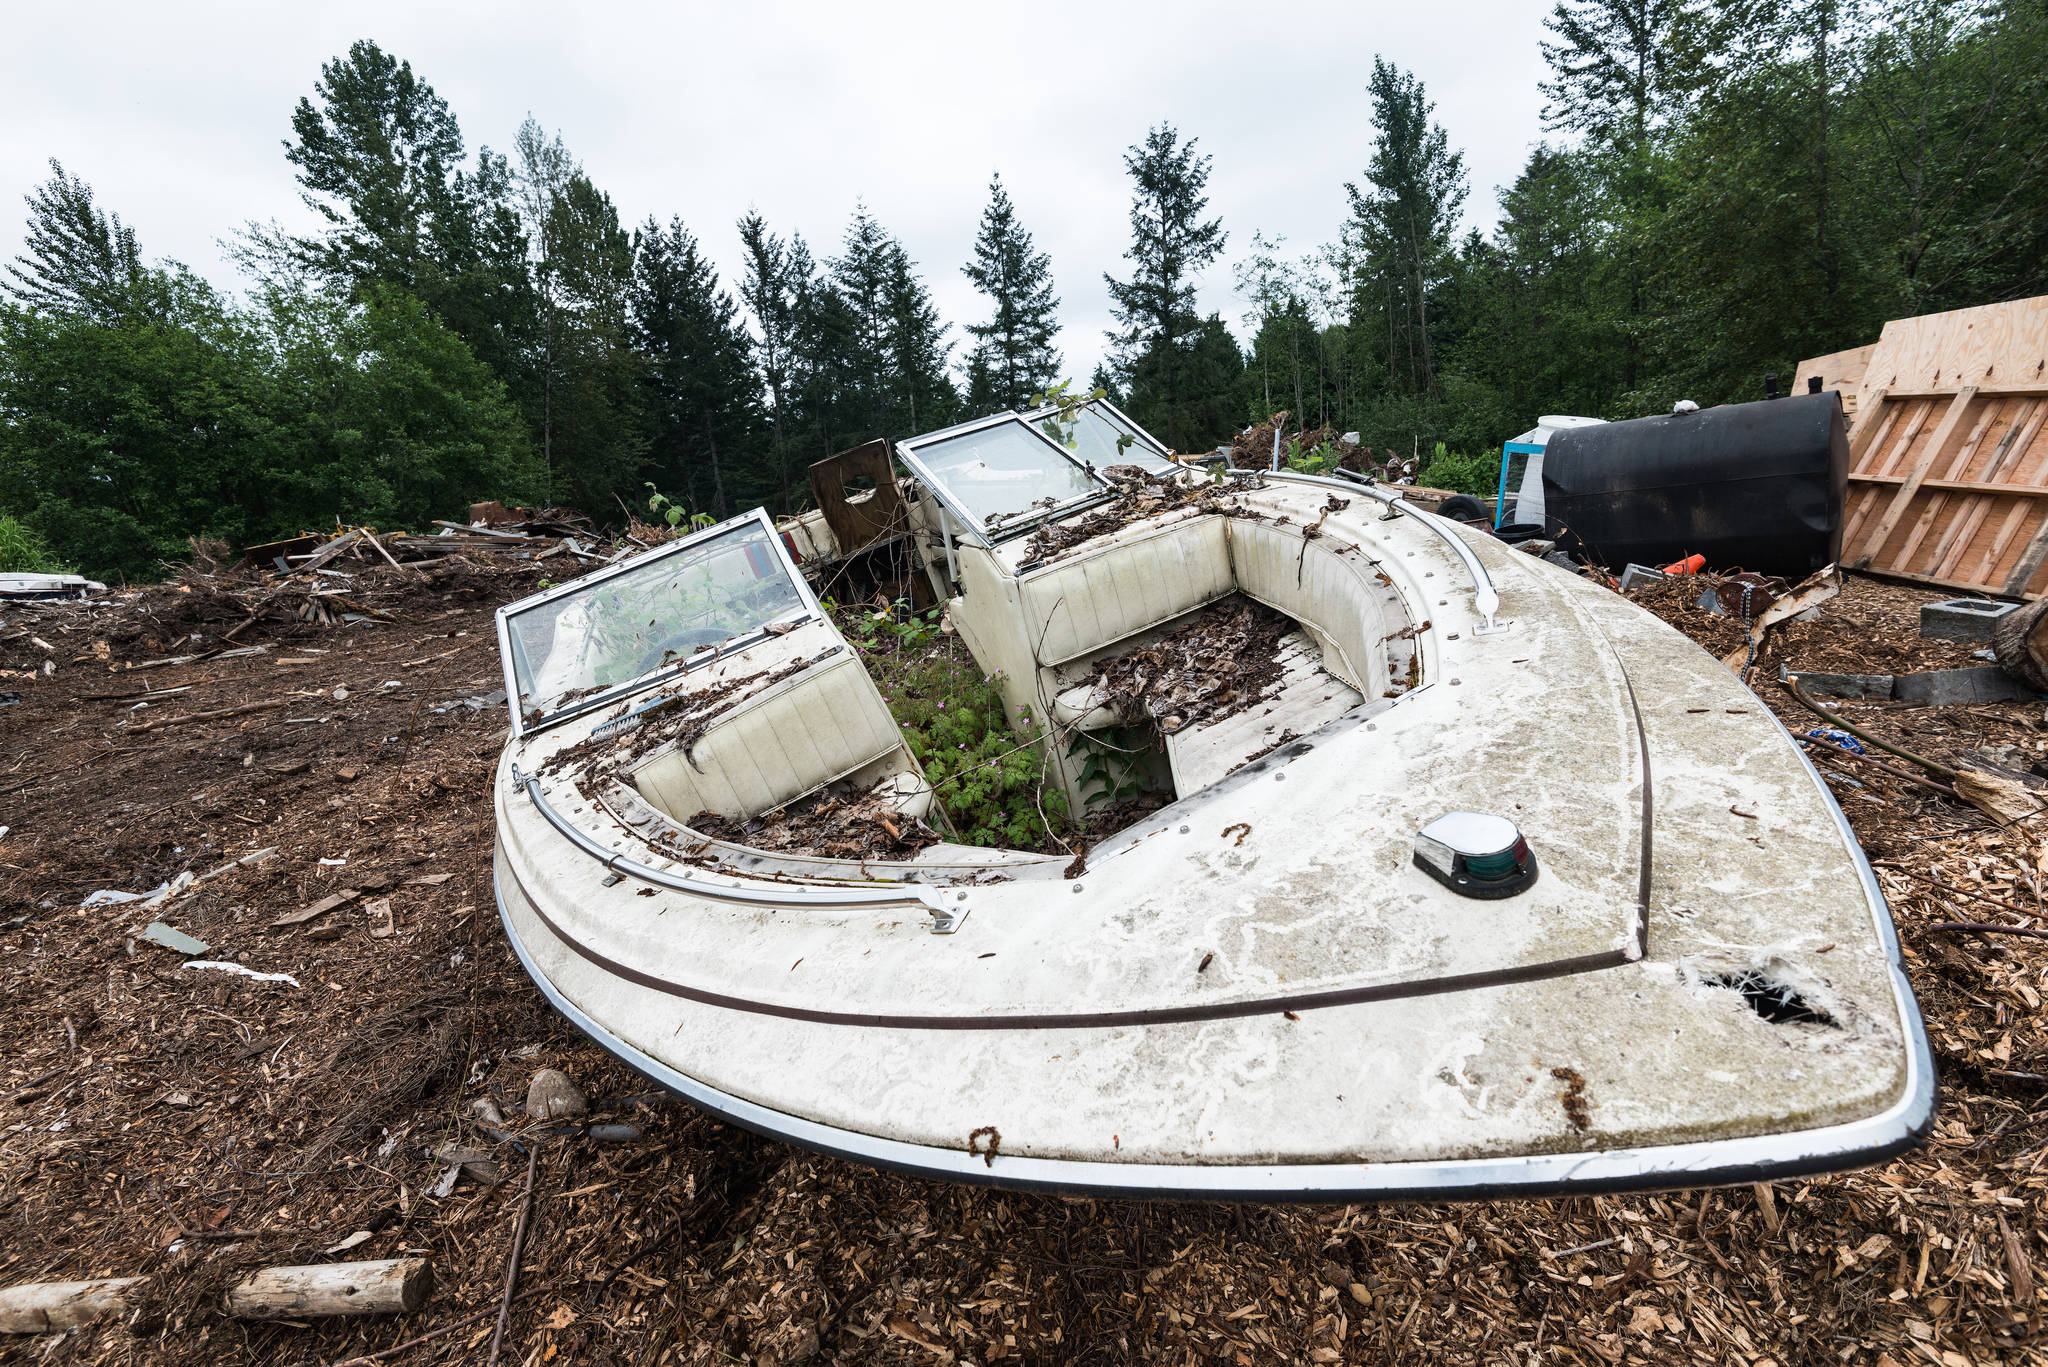 An old boat finds it’s new purpose as a plant pot. Many of the vehicles have sprouted plant life from within. Photo by Caean Couto